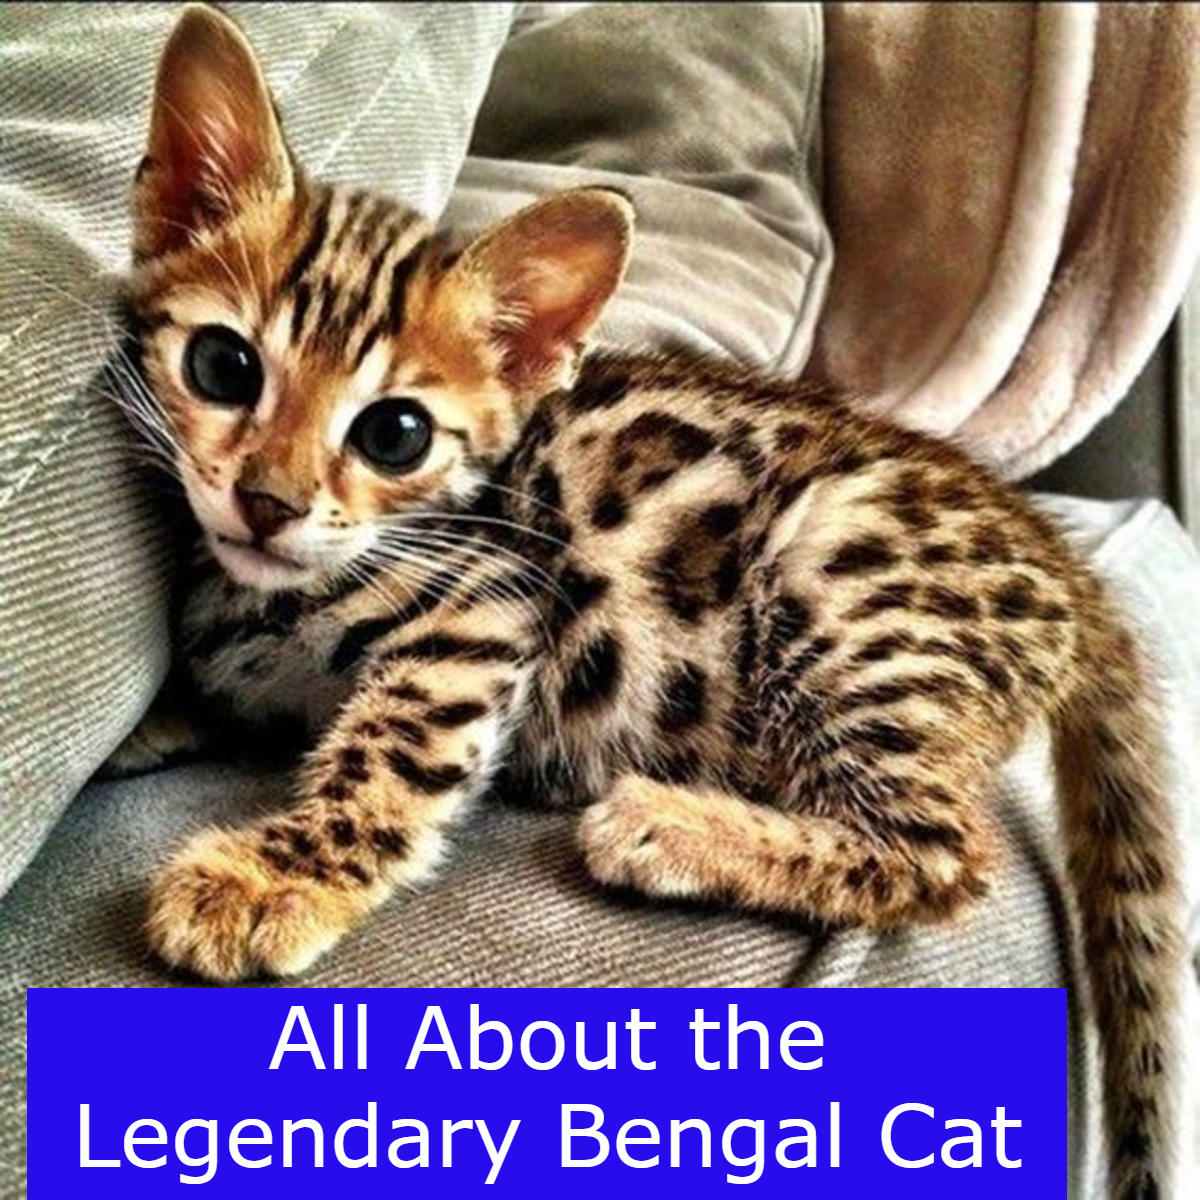 All About the Legendary Bengal Cat